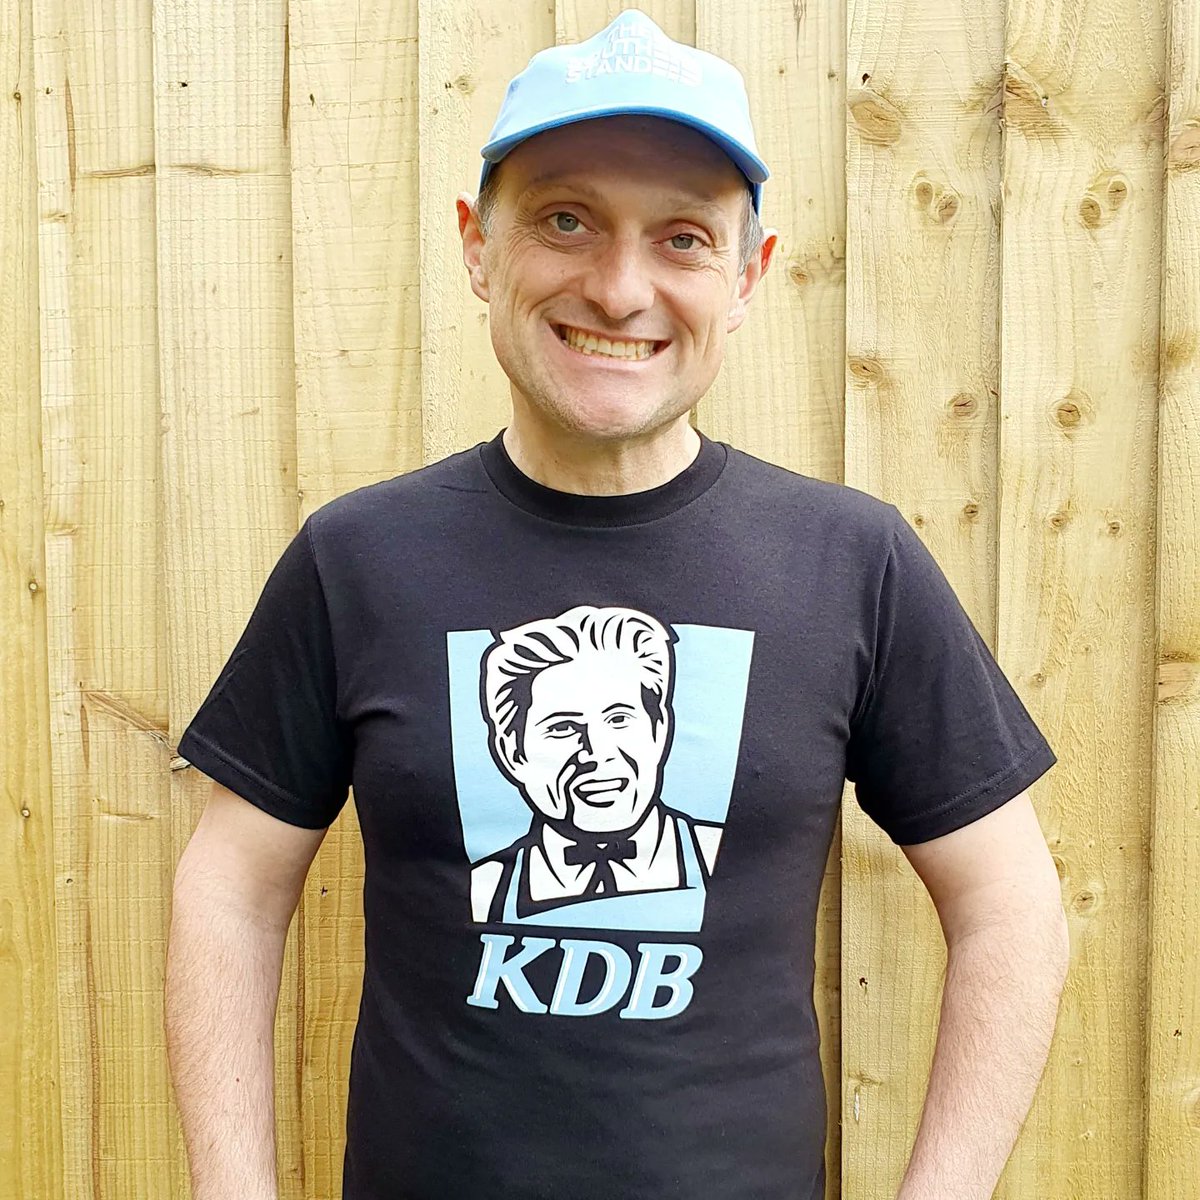 Matchday competition! Win one of our new KDB tshirts Retweet to enter If City beat Real tonight and Kev scores or assists the first goal we'll give away a tshirt to a follower who retweets Good luck and cmon City Check out our new tshirts here thegingerwigscitygifts.com/new-in-36-c.asp